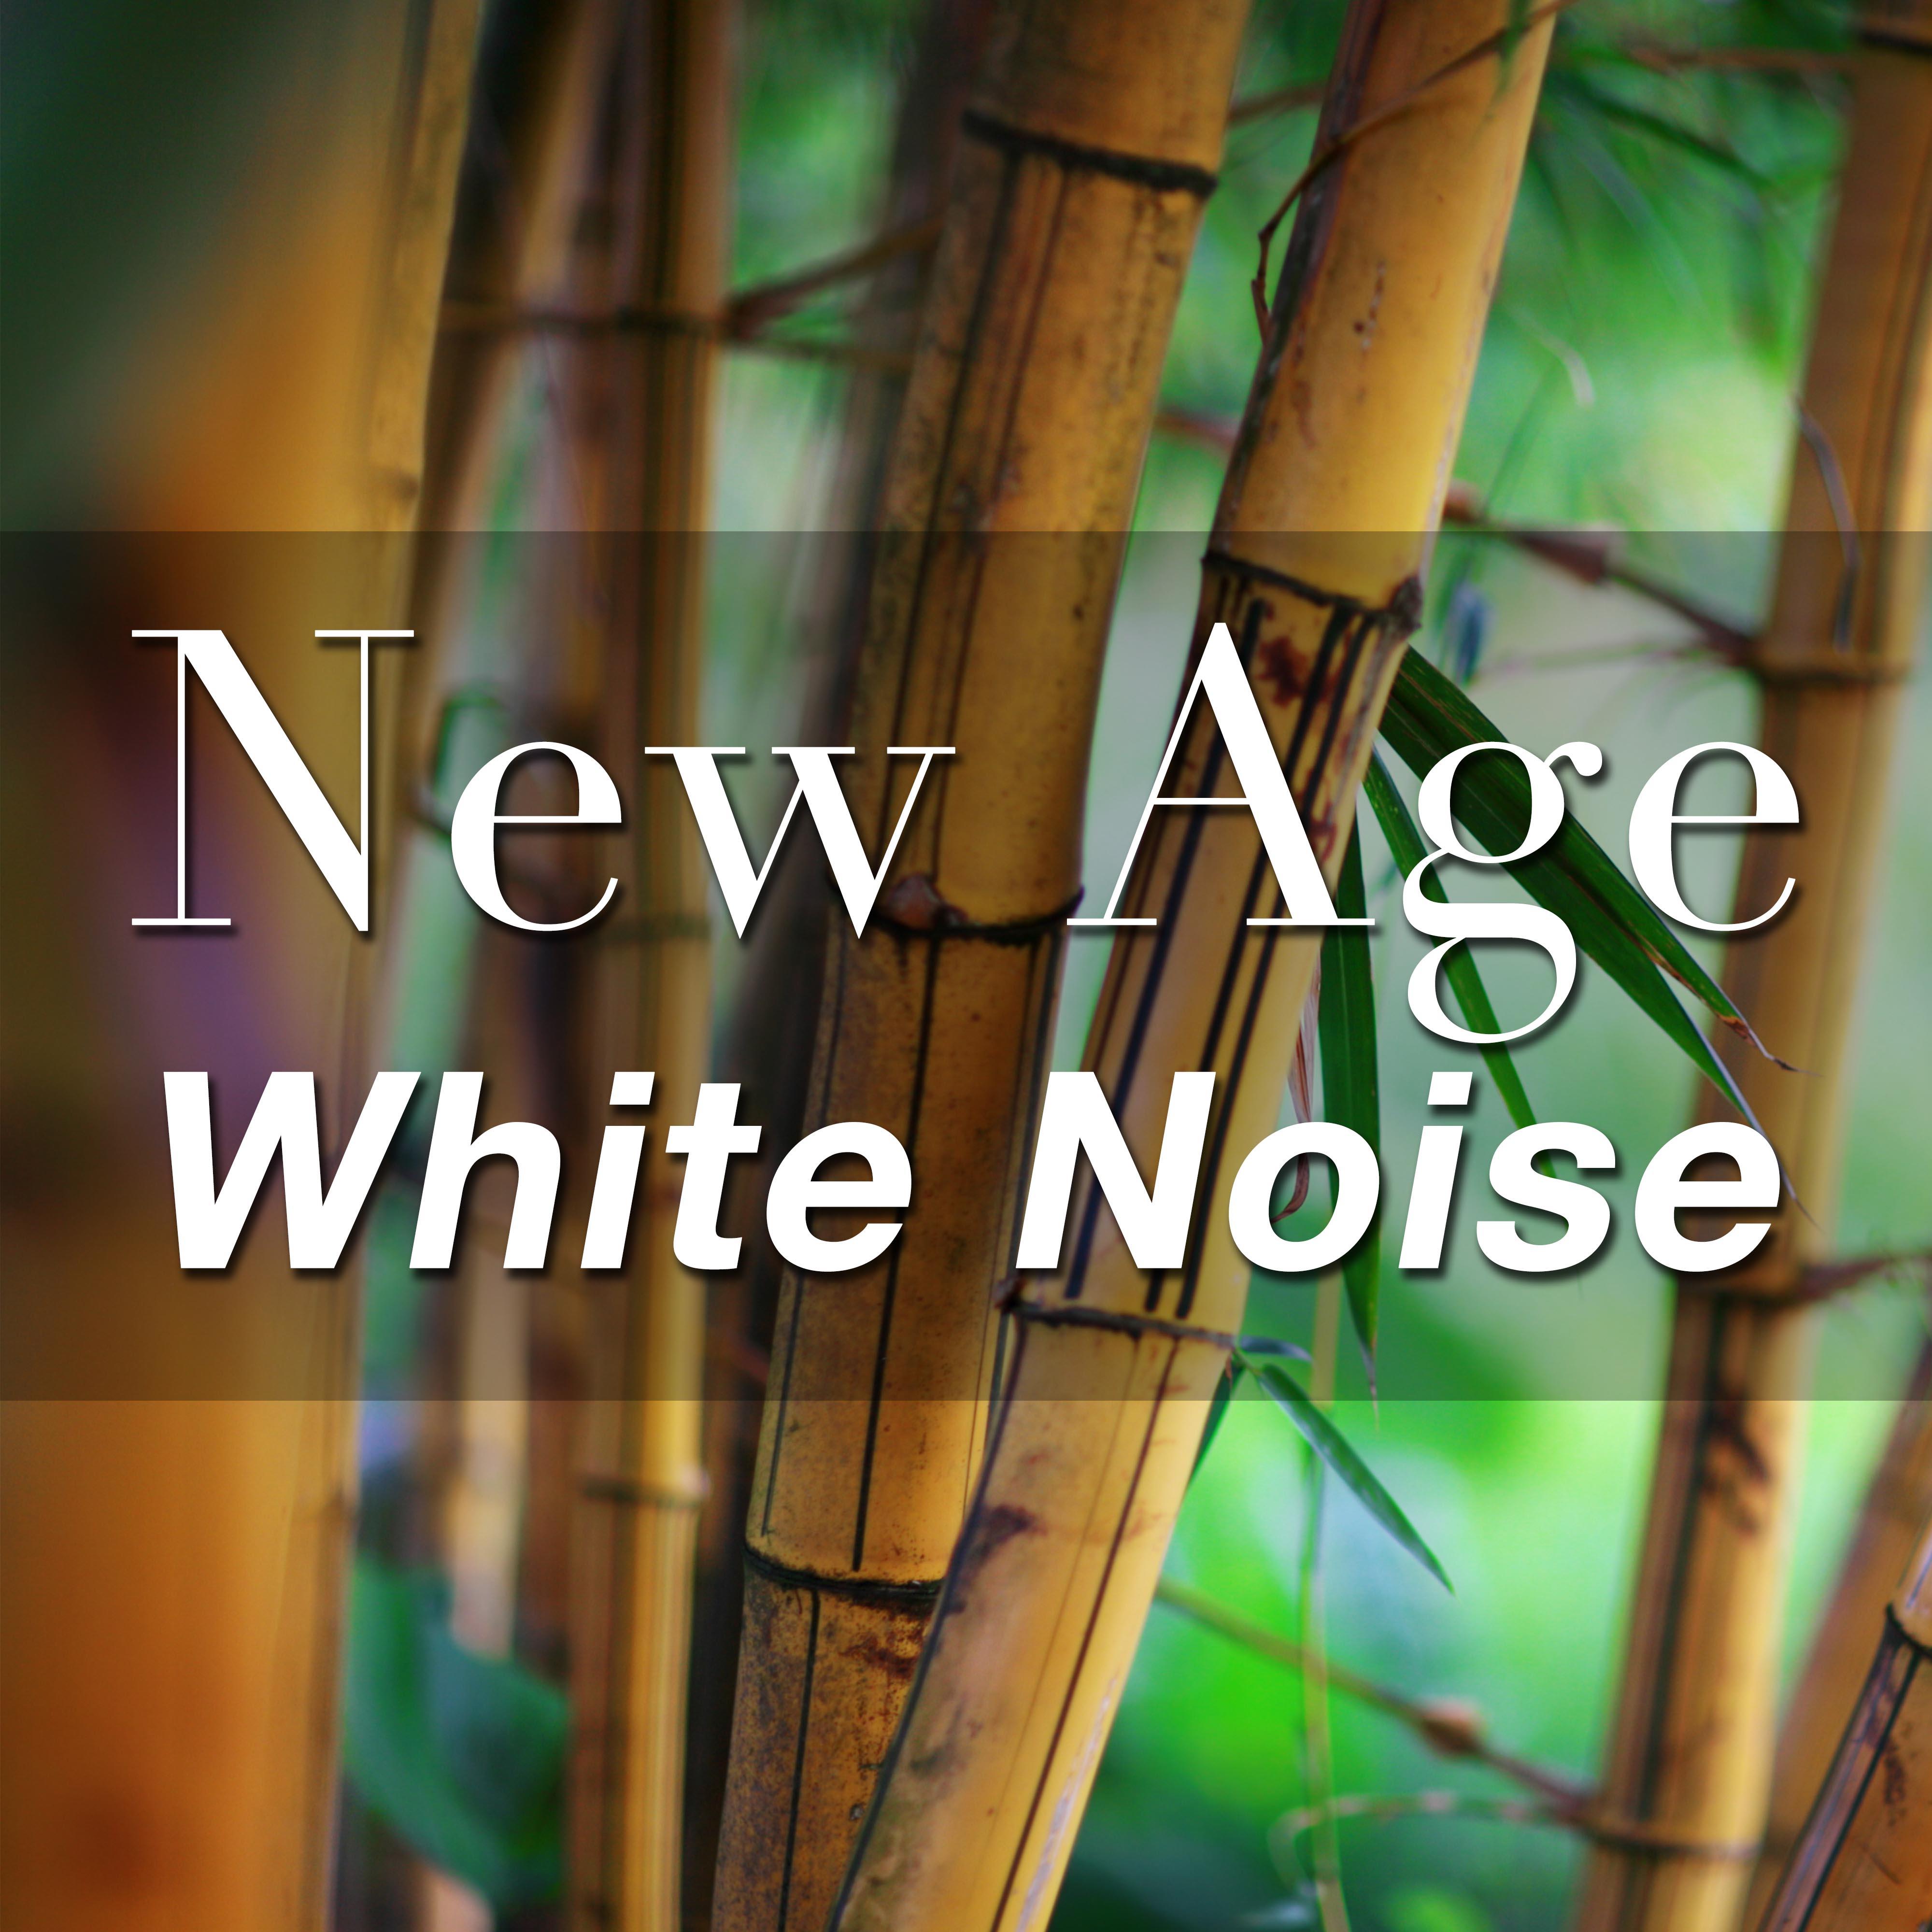 New Age White Noise: Ambient Music Playlist for Intense States of Quiet, Peace, and Calm with Sounds of Nature like Rain, Wind and Waves on Tropical Beaches